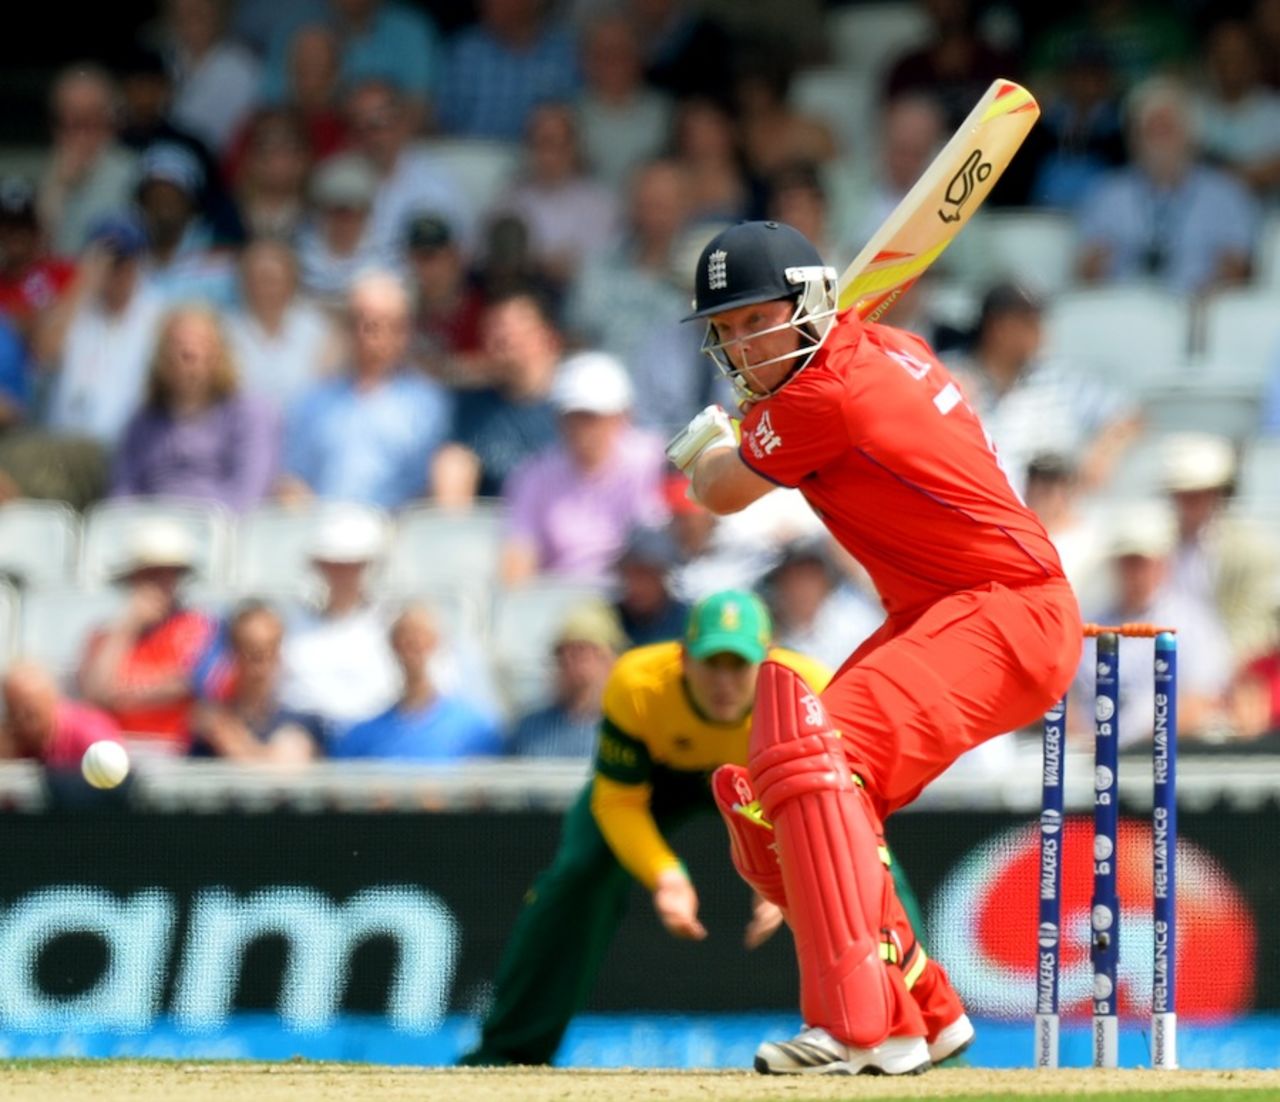 Ian Bell prepares to cut the ball, England v South Africa, 1st semi-final, Champions Trophy, The Oval, June 19, 2013